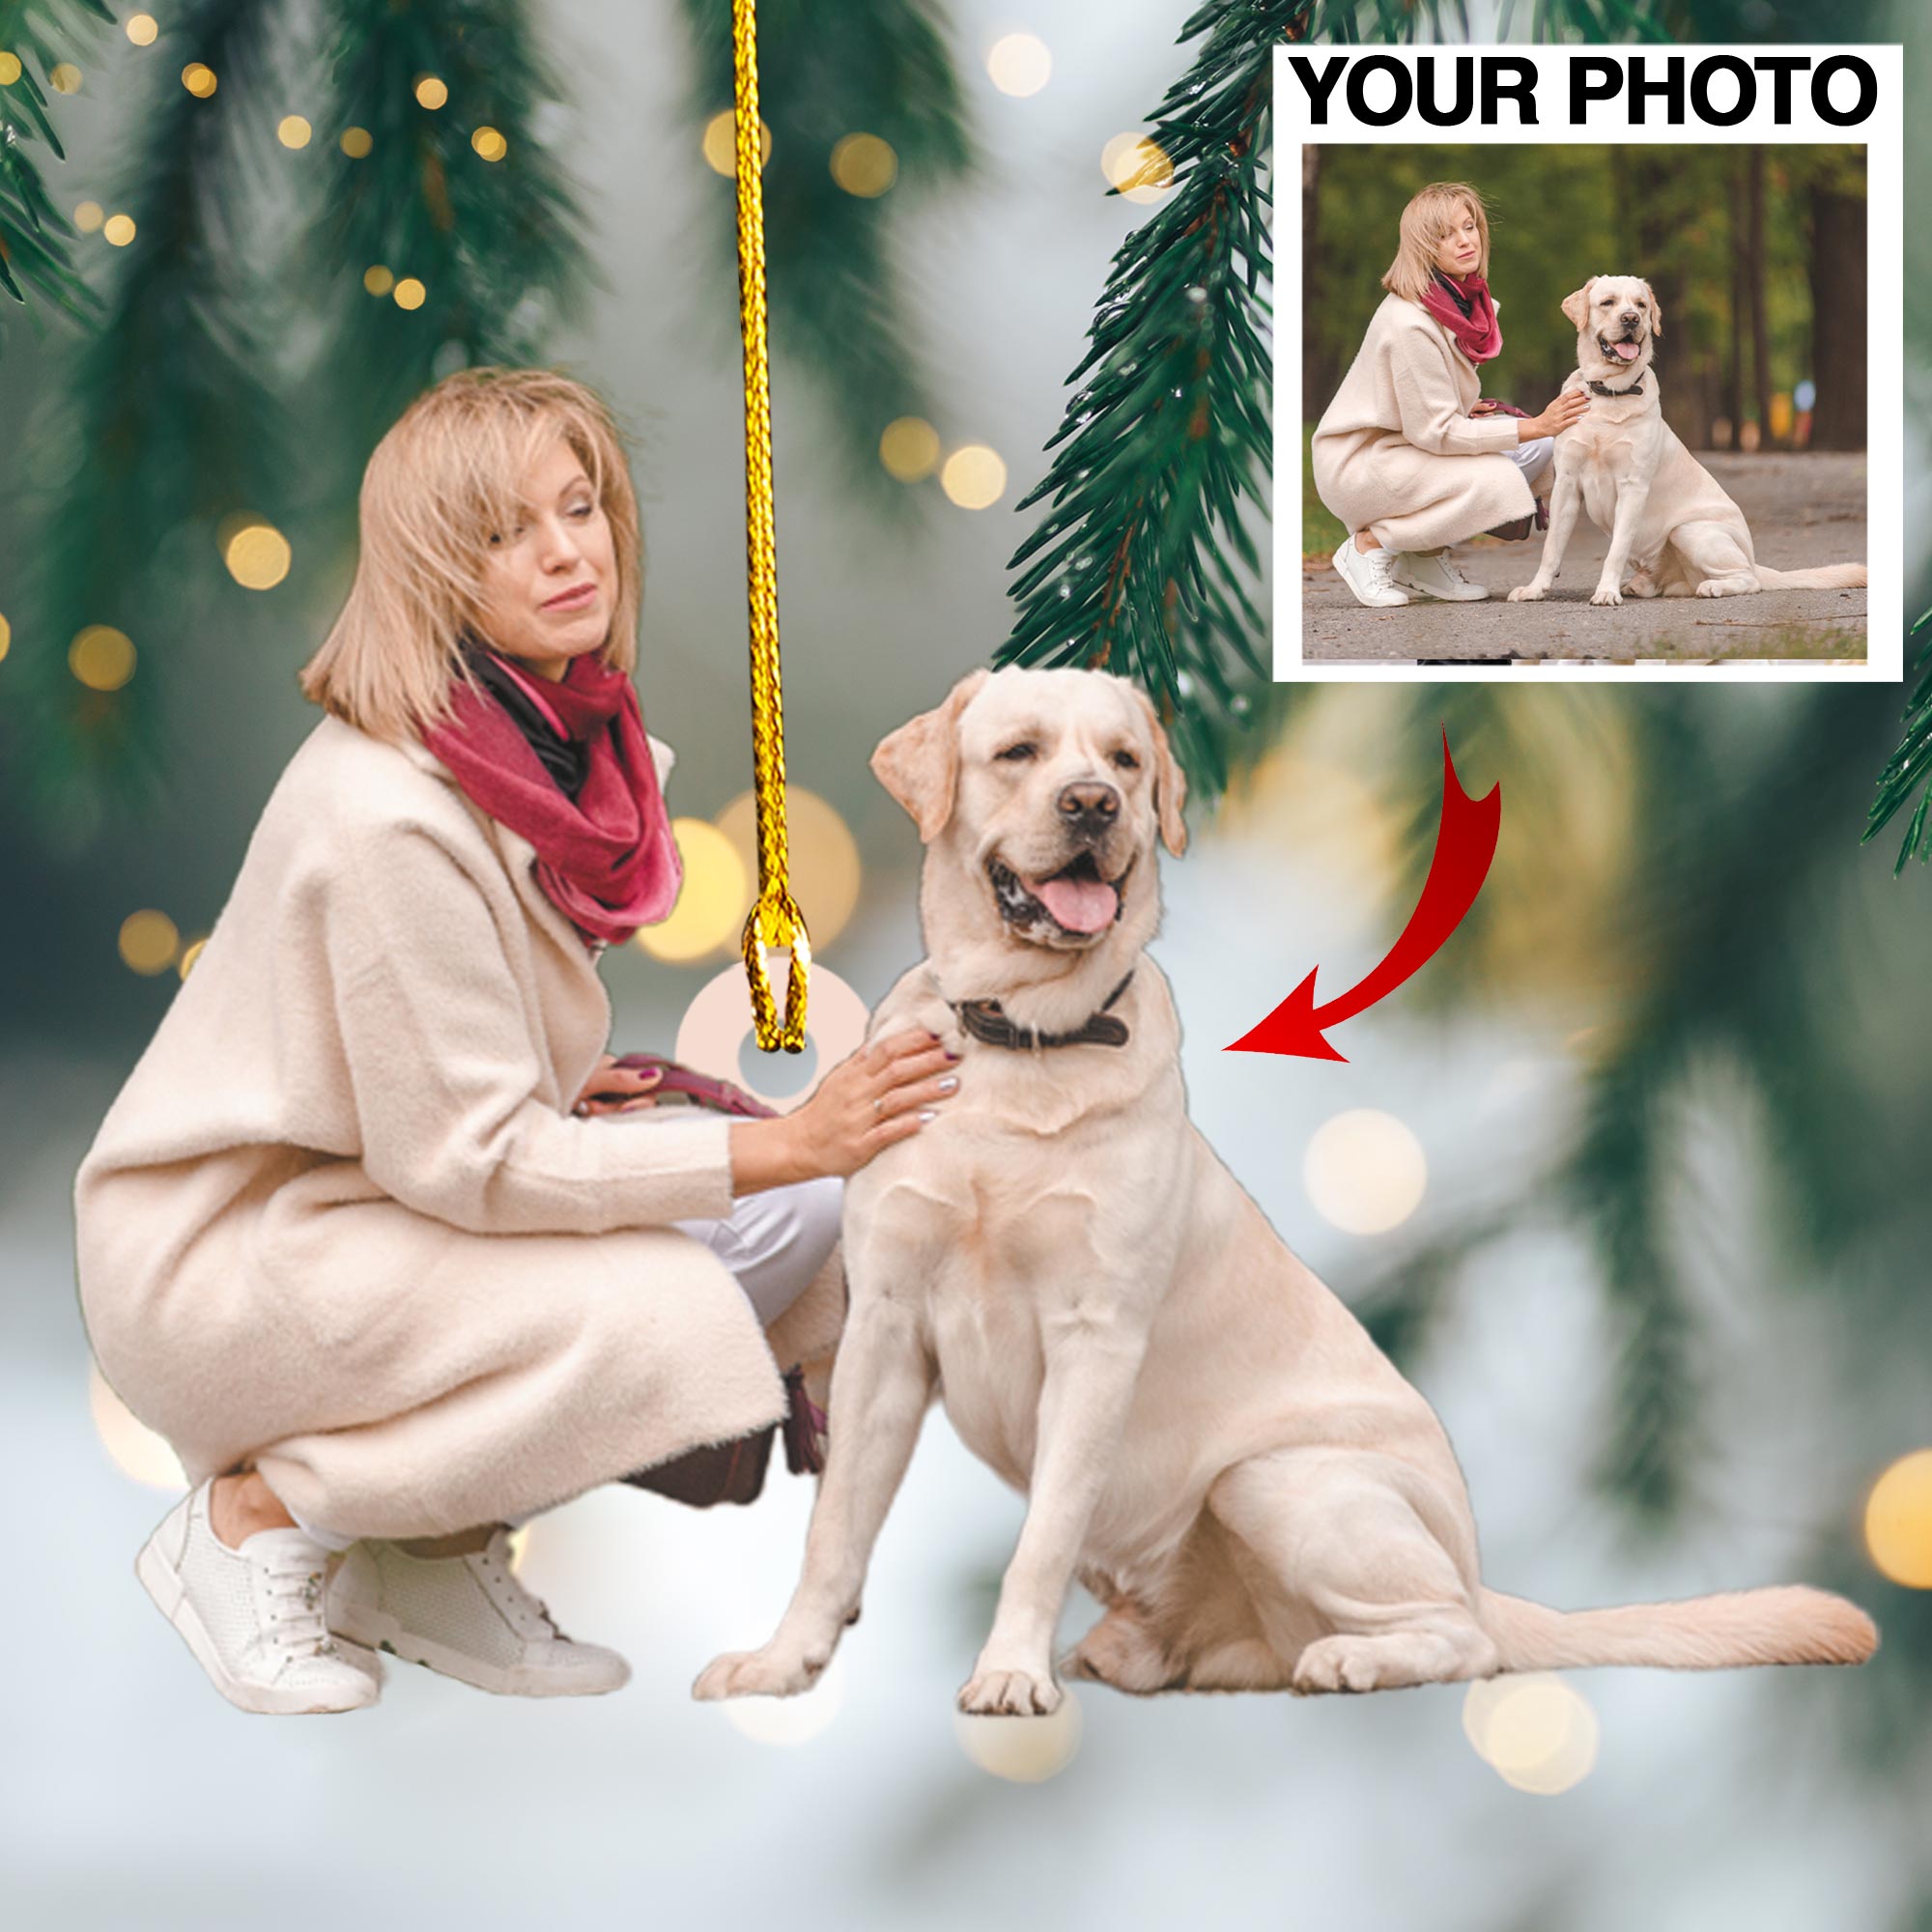 Customized Your Photo Ornament